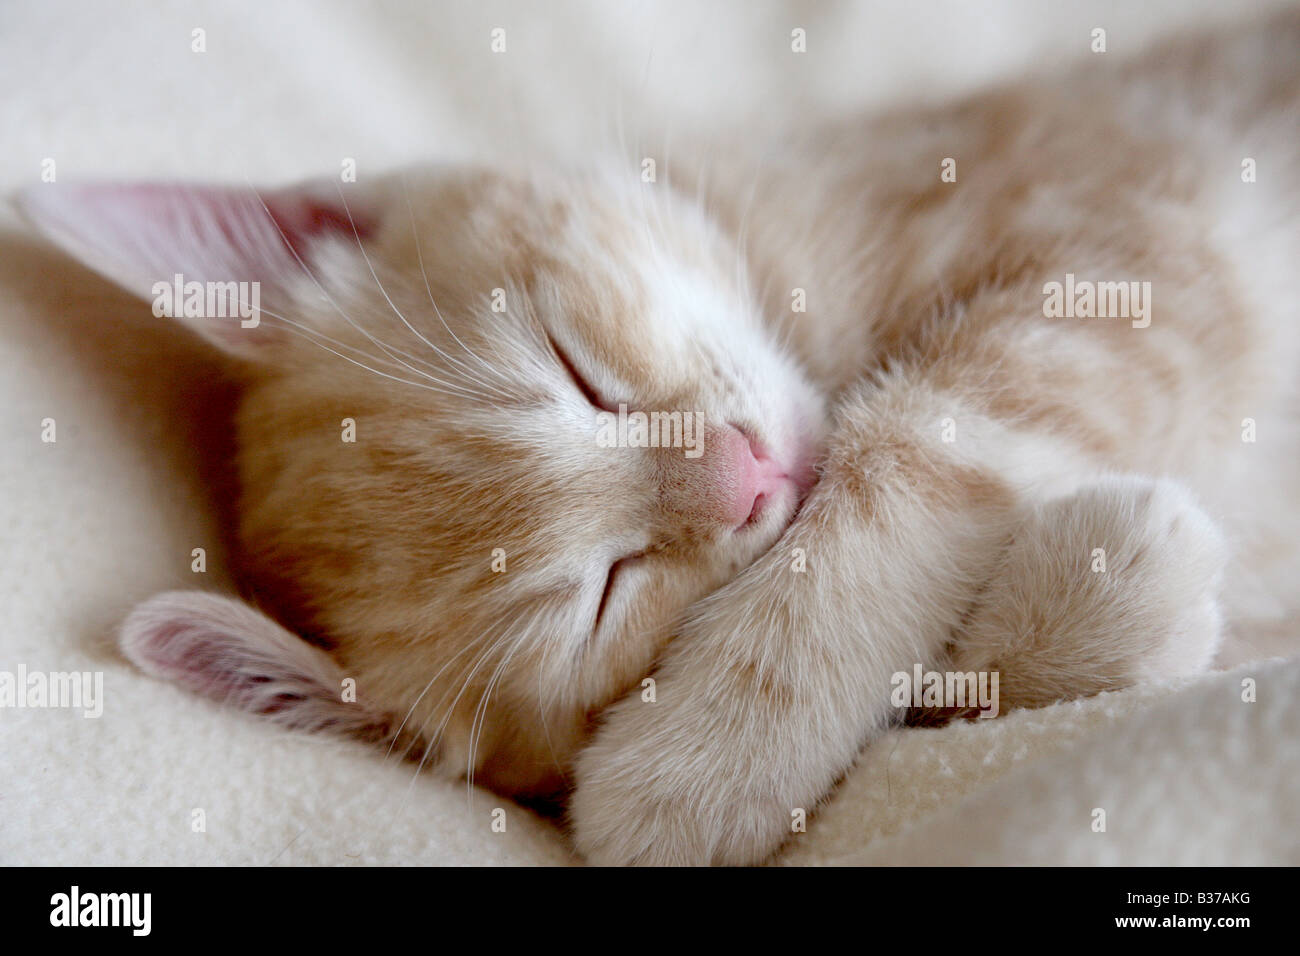 A 9 week old cream and ginger kitten sleeping on a blanket Stock Photo